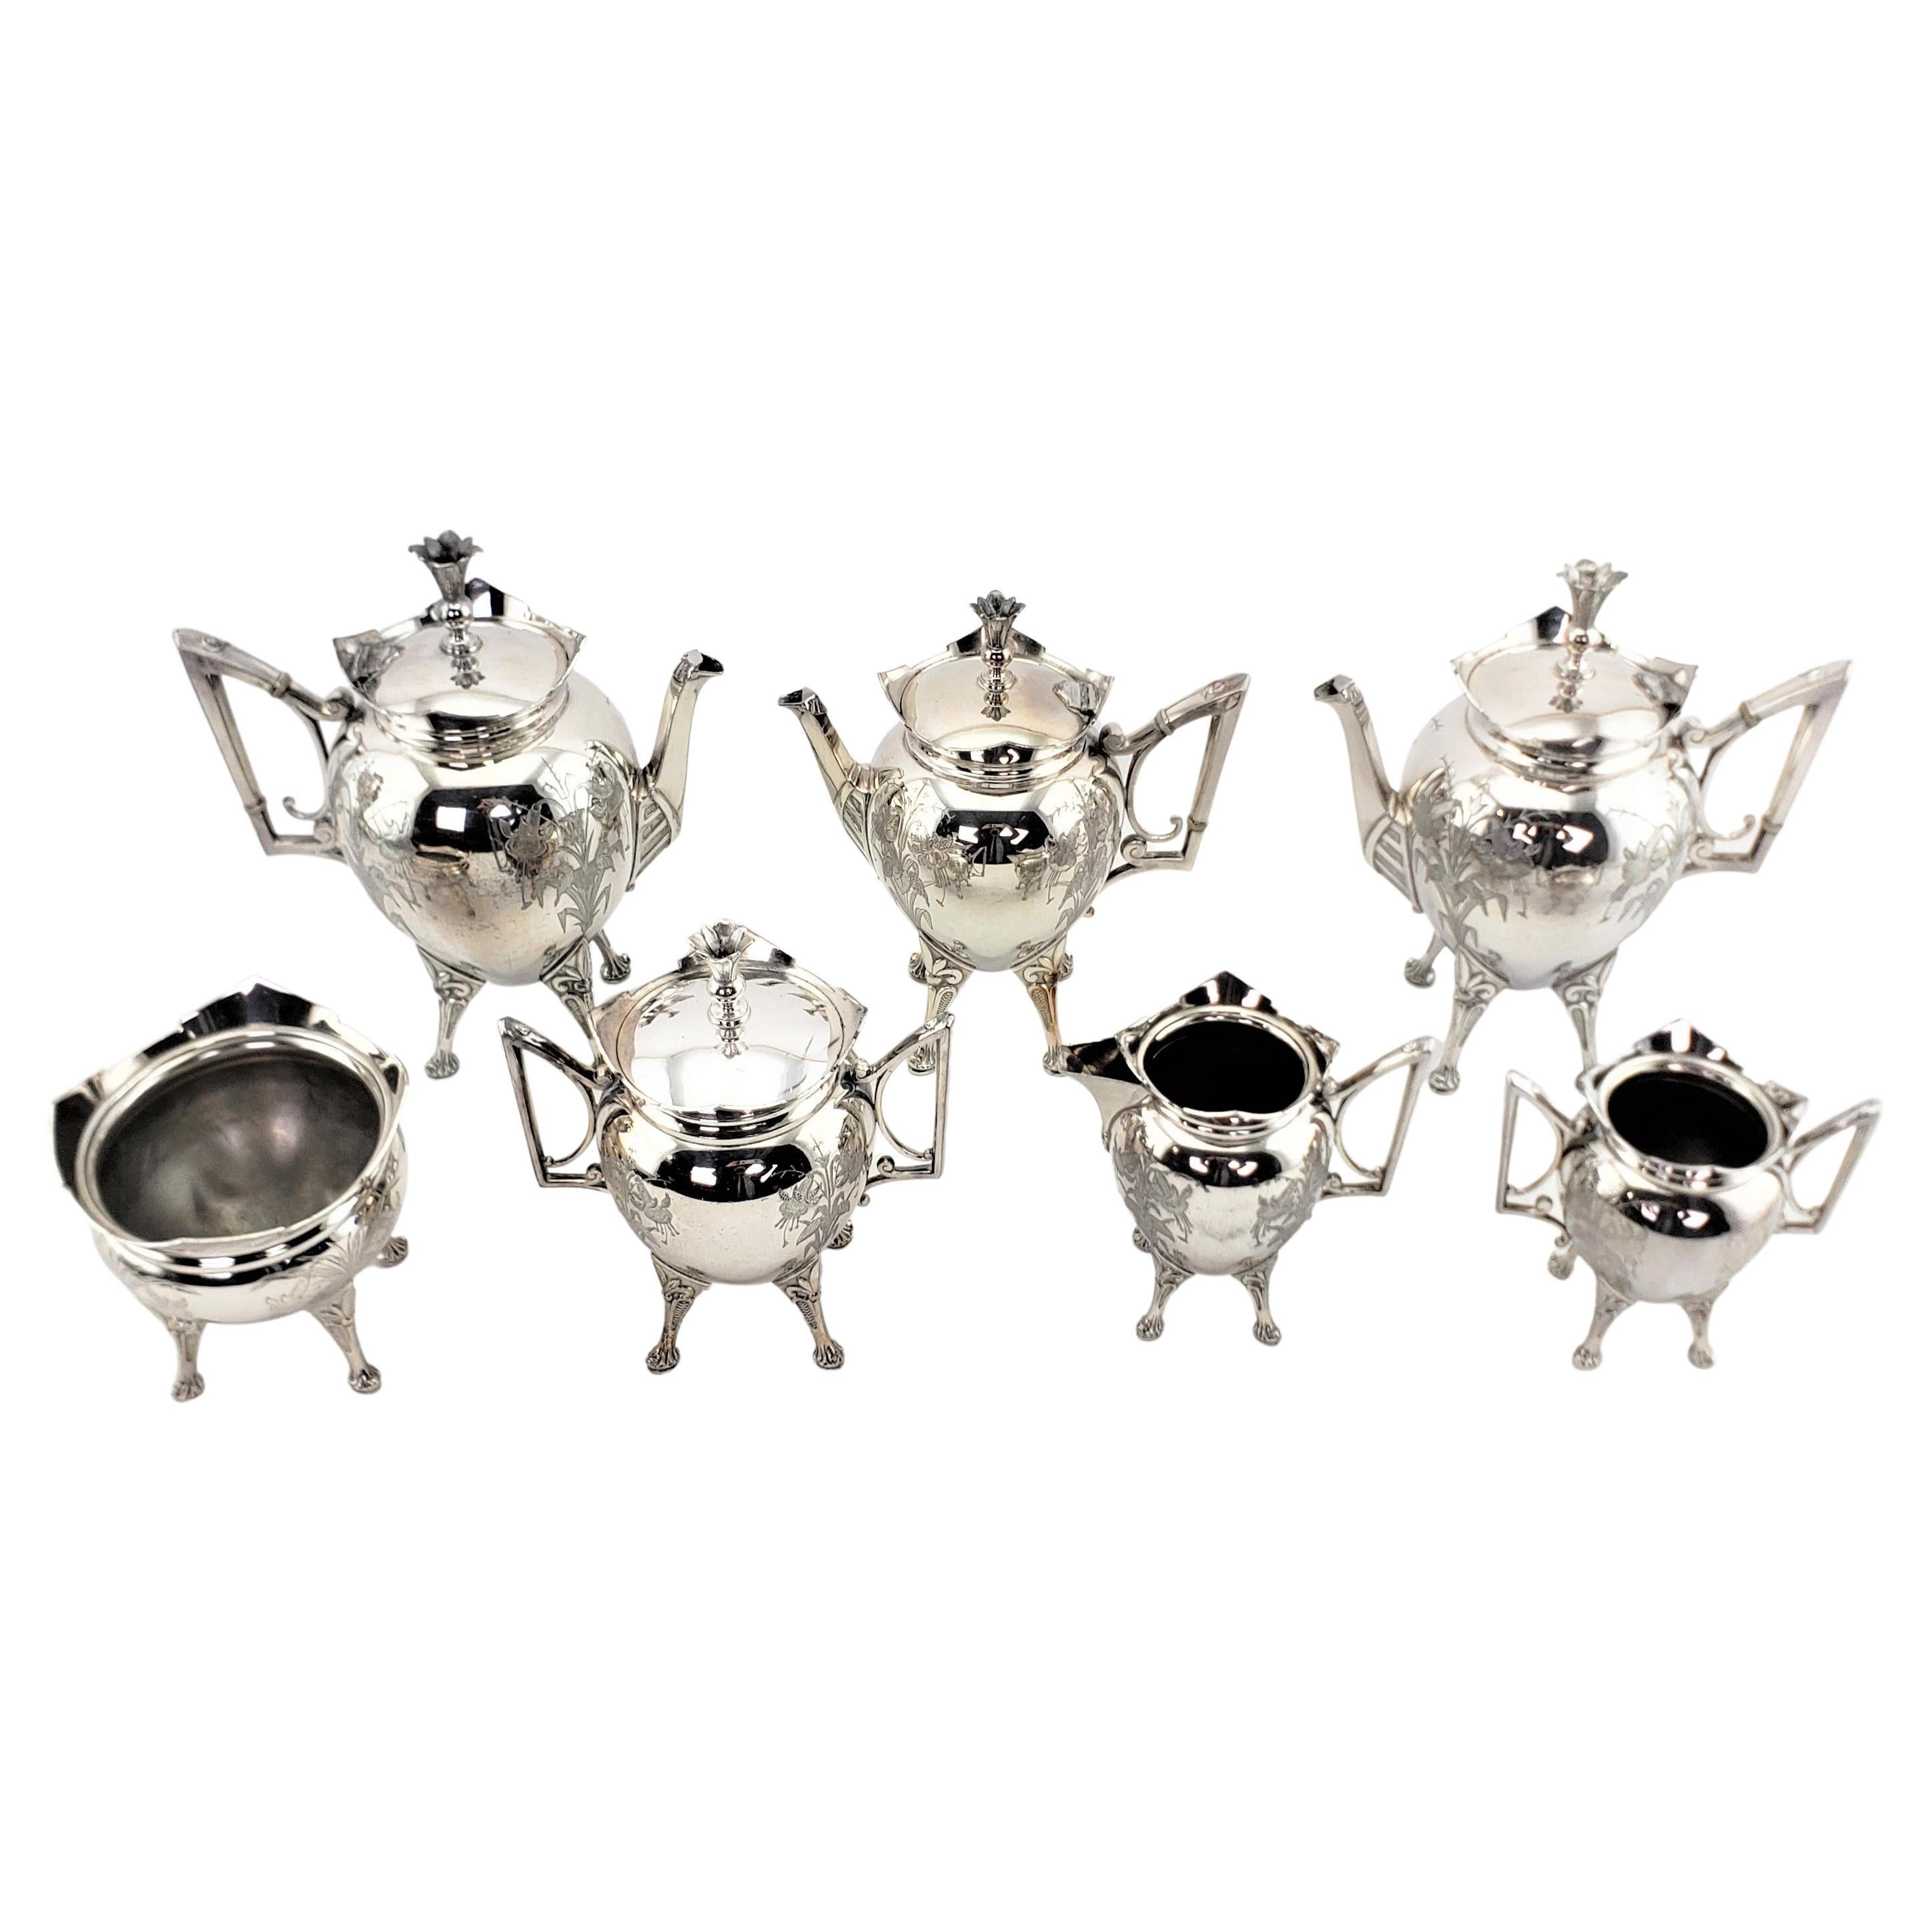 Antique Aesthetic Movement 7 Piece Silver Plated Tea Set with Floral Decoration